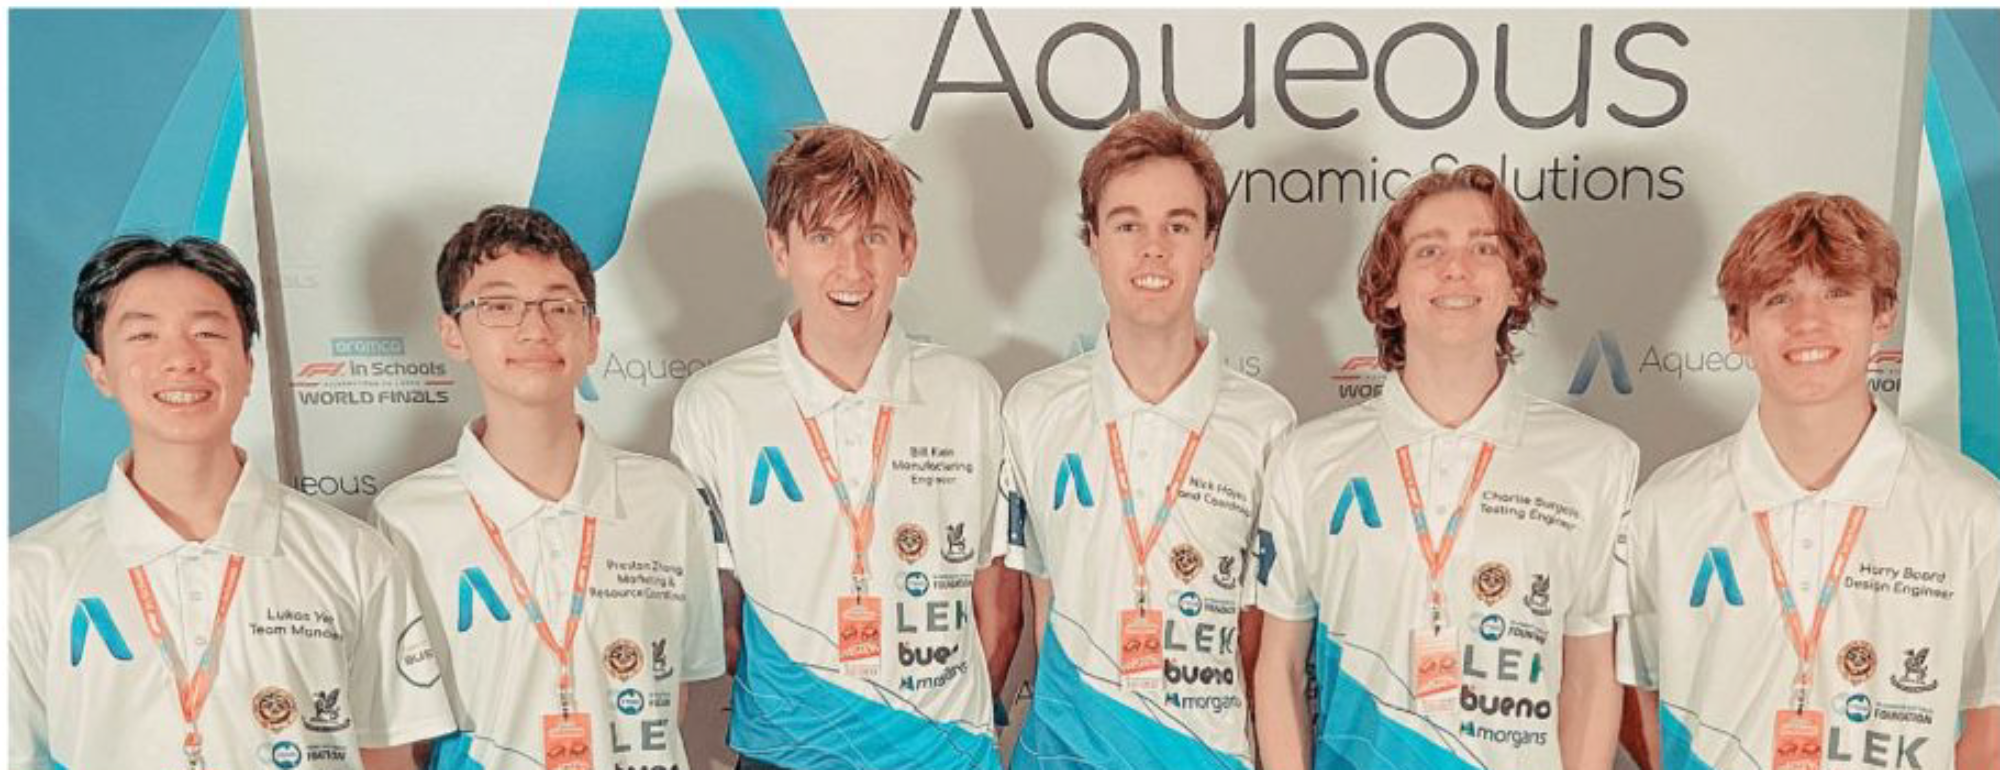 Team Aqueous does us proud on the world stage